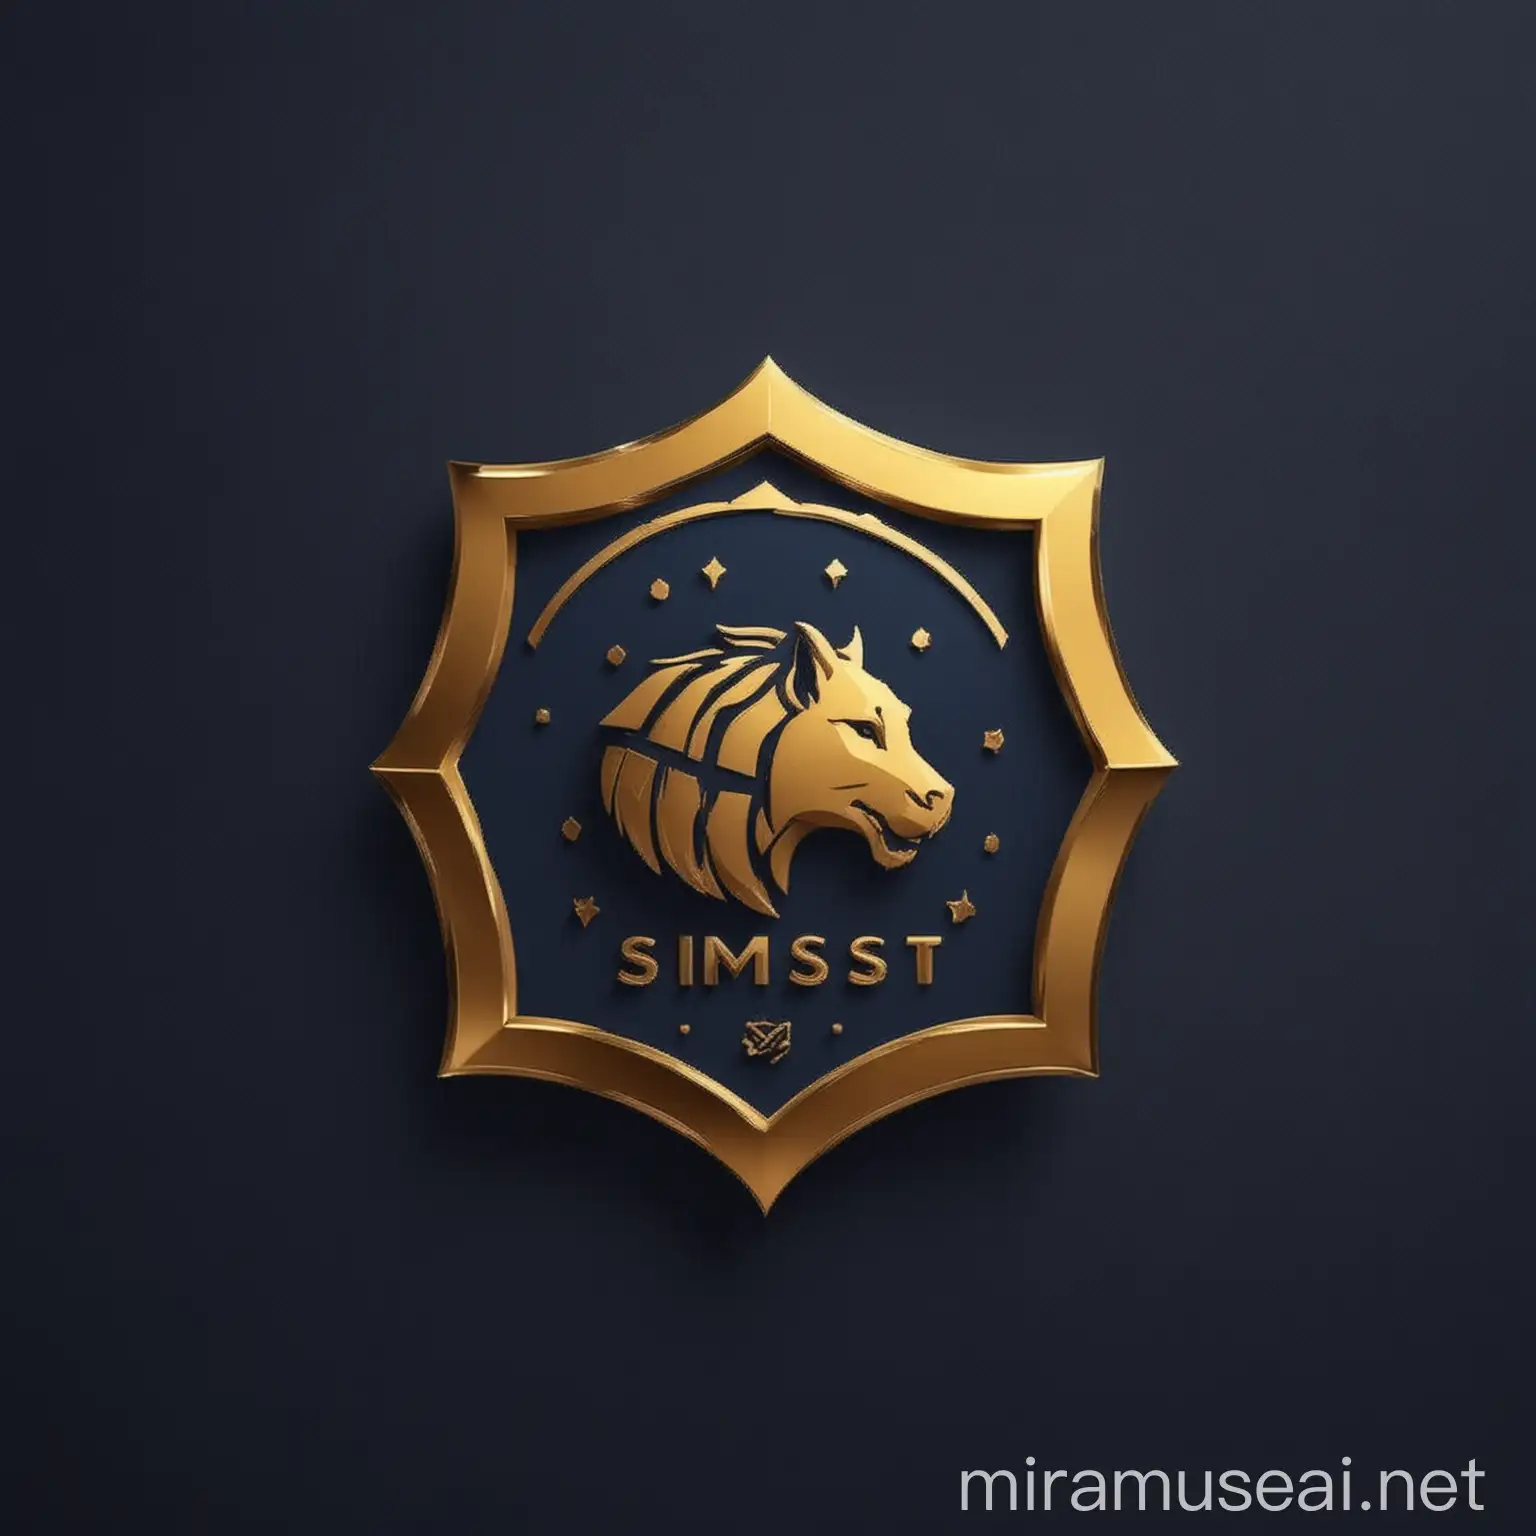 Dark Blue and Golden Investment Company Logo with Securities